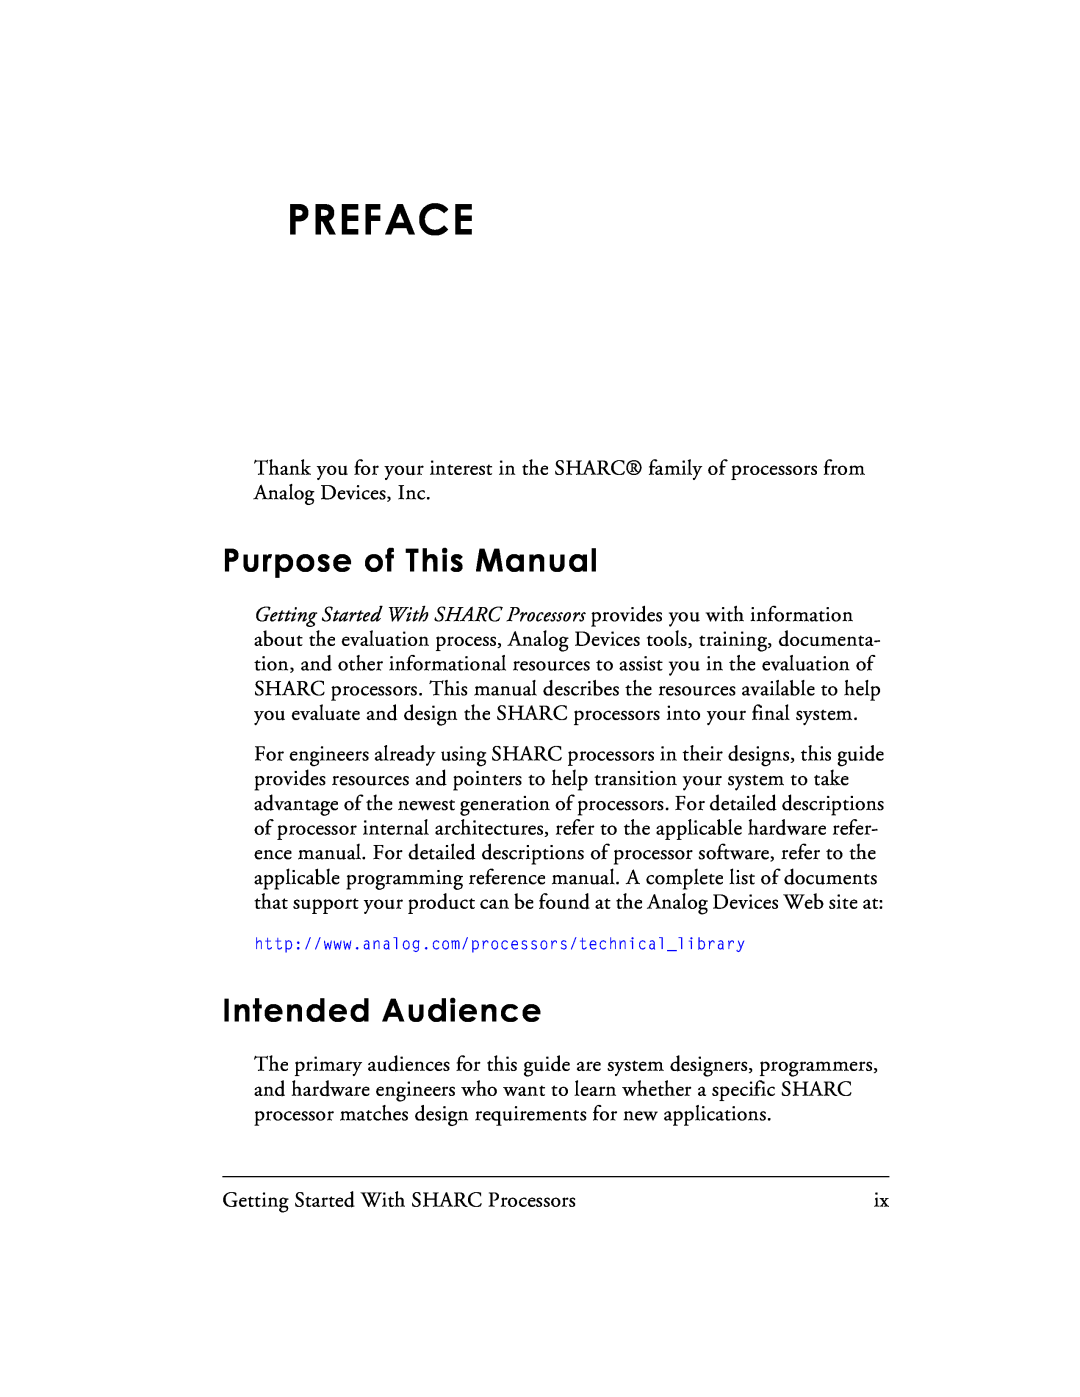 Analog Devices 82-003536-01 manual Preface, Purpose of This Manual, Intended Audience 